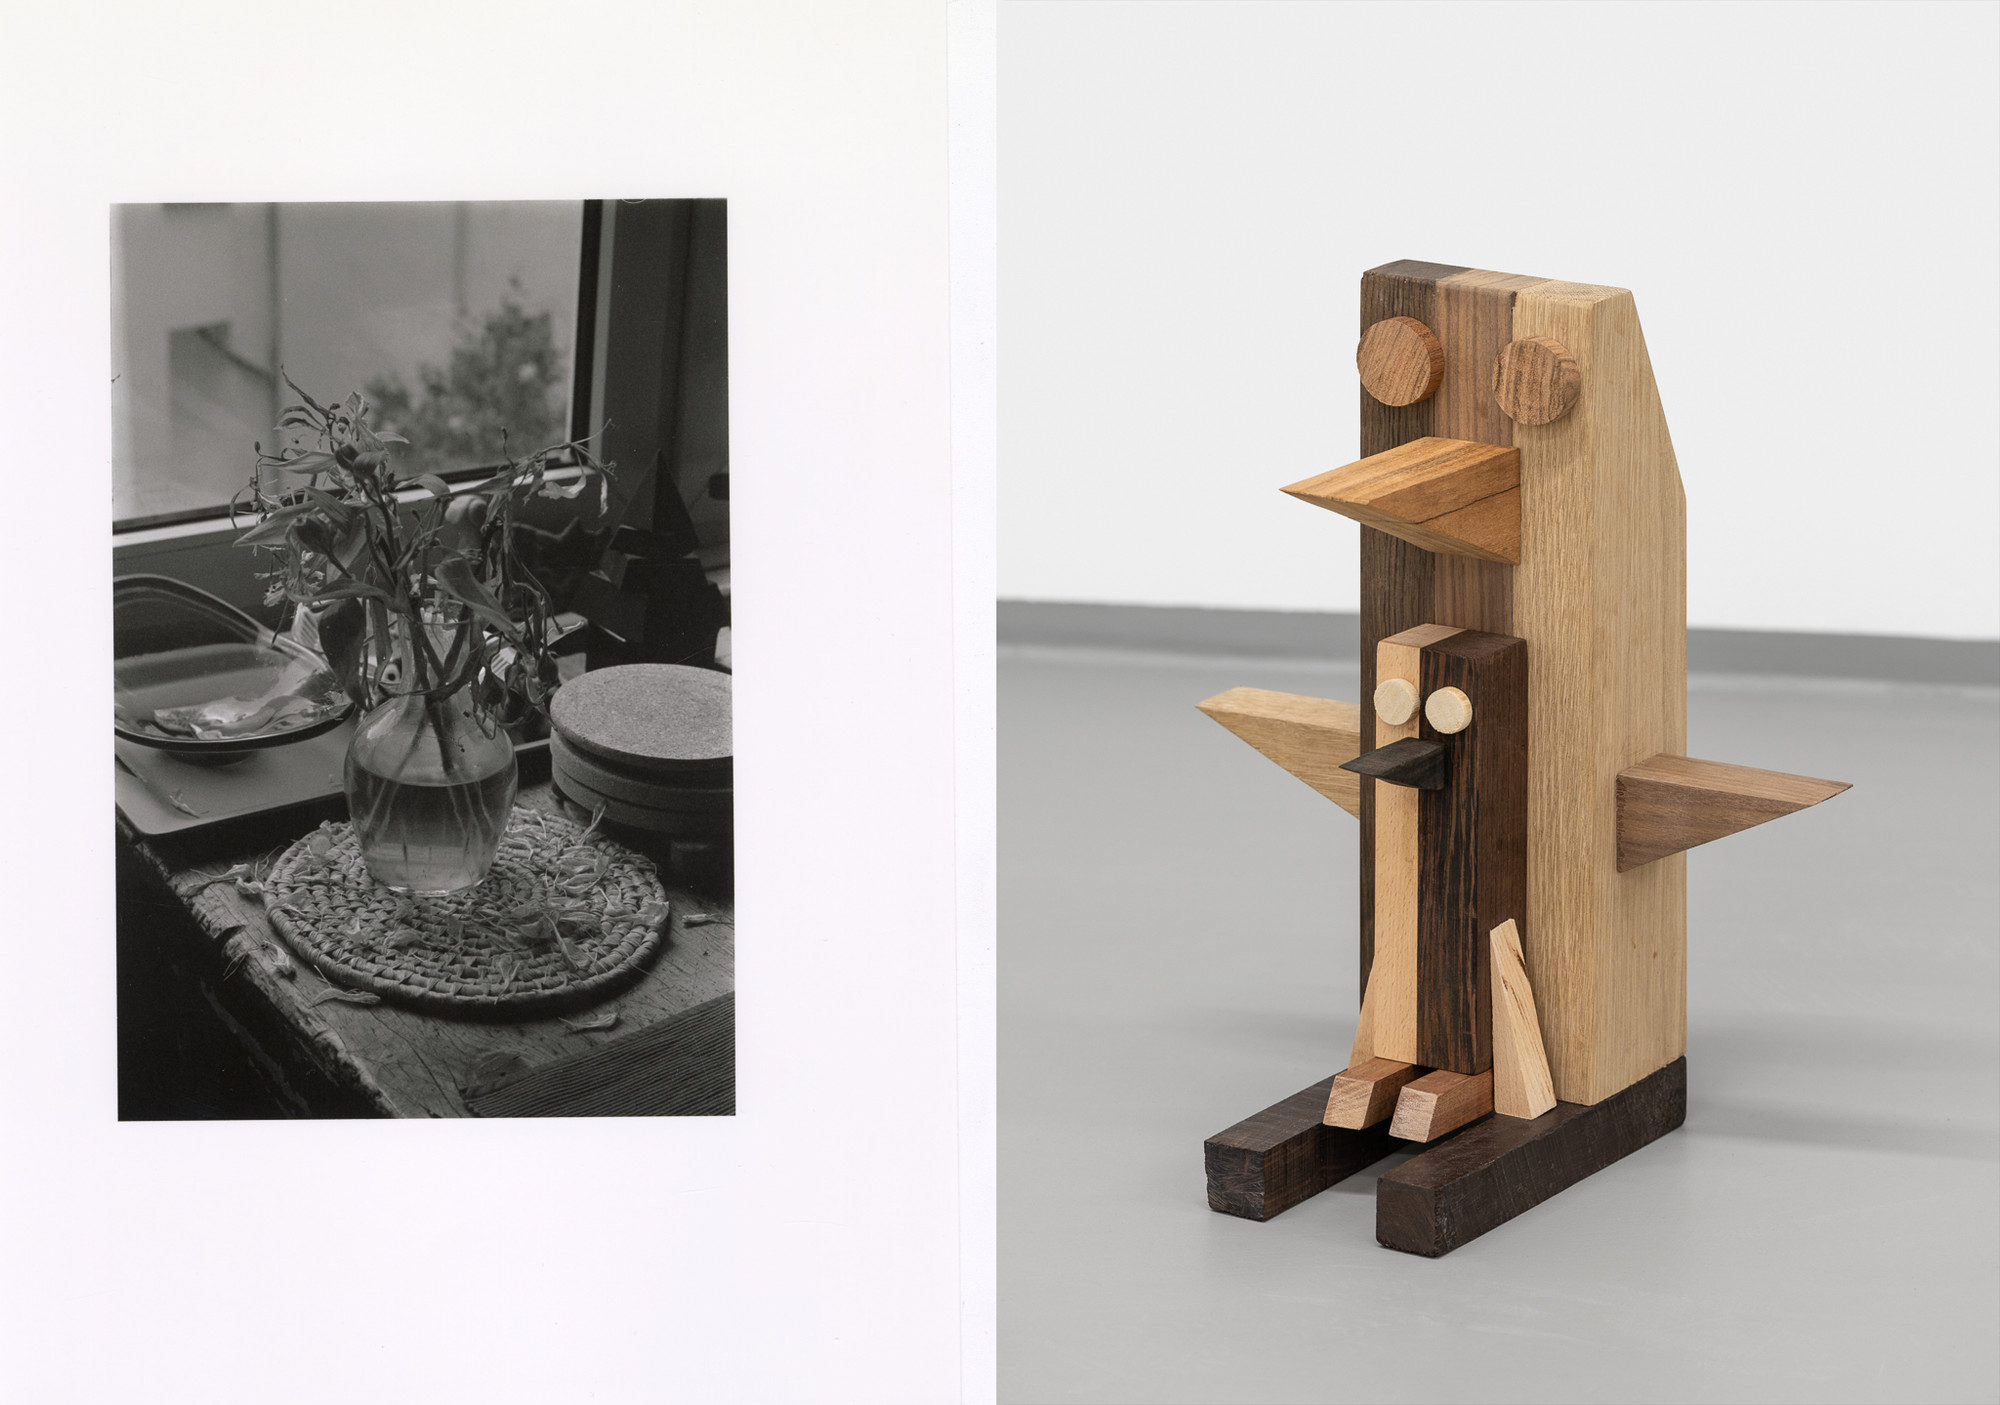 Two images. Left side is a black and white close up photo of a table with different obejcts, such as a vase with flowers and a bowl. Right side is wooden sculpture that resembles a large and a small penguine